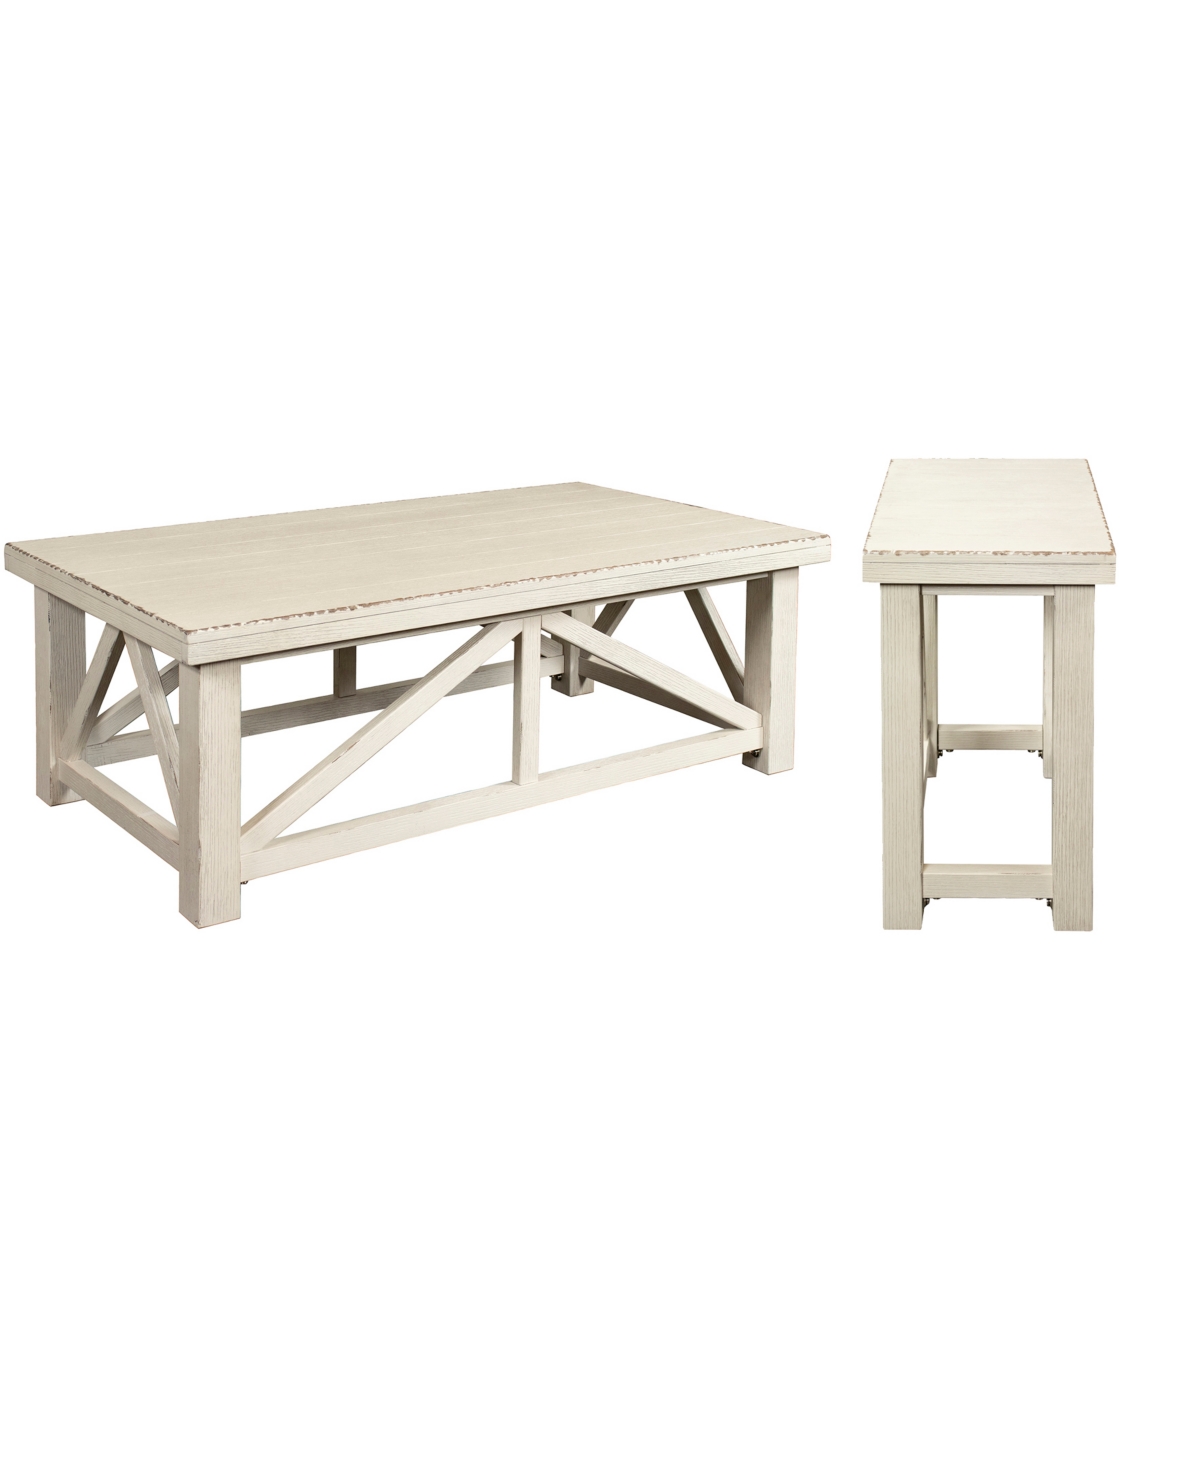 Aberdeen Cocktail Table and Chairside Table Set